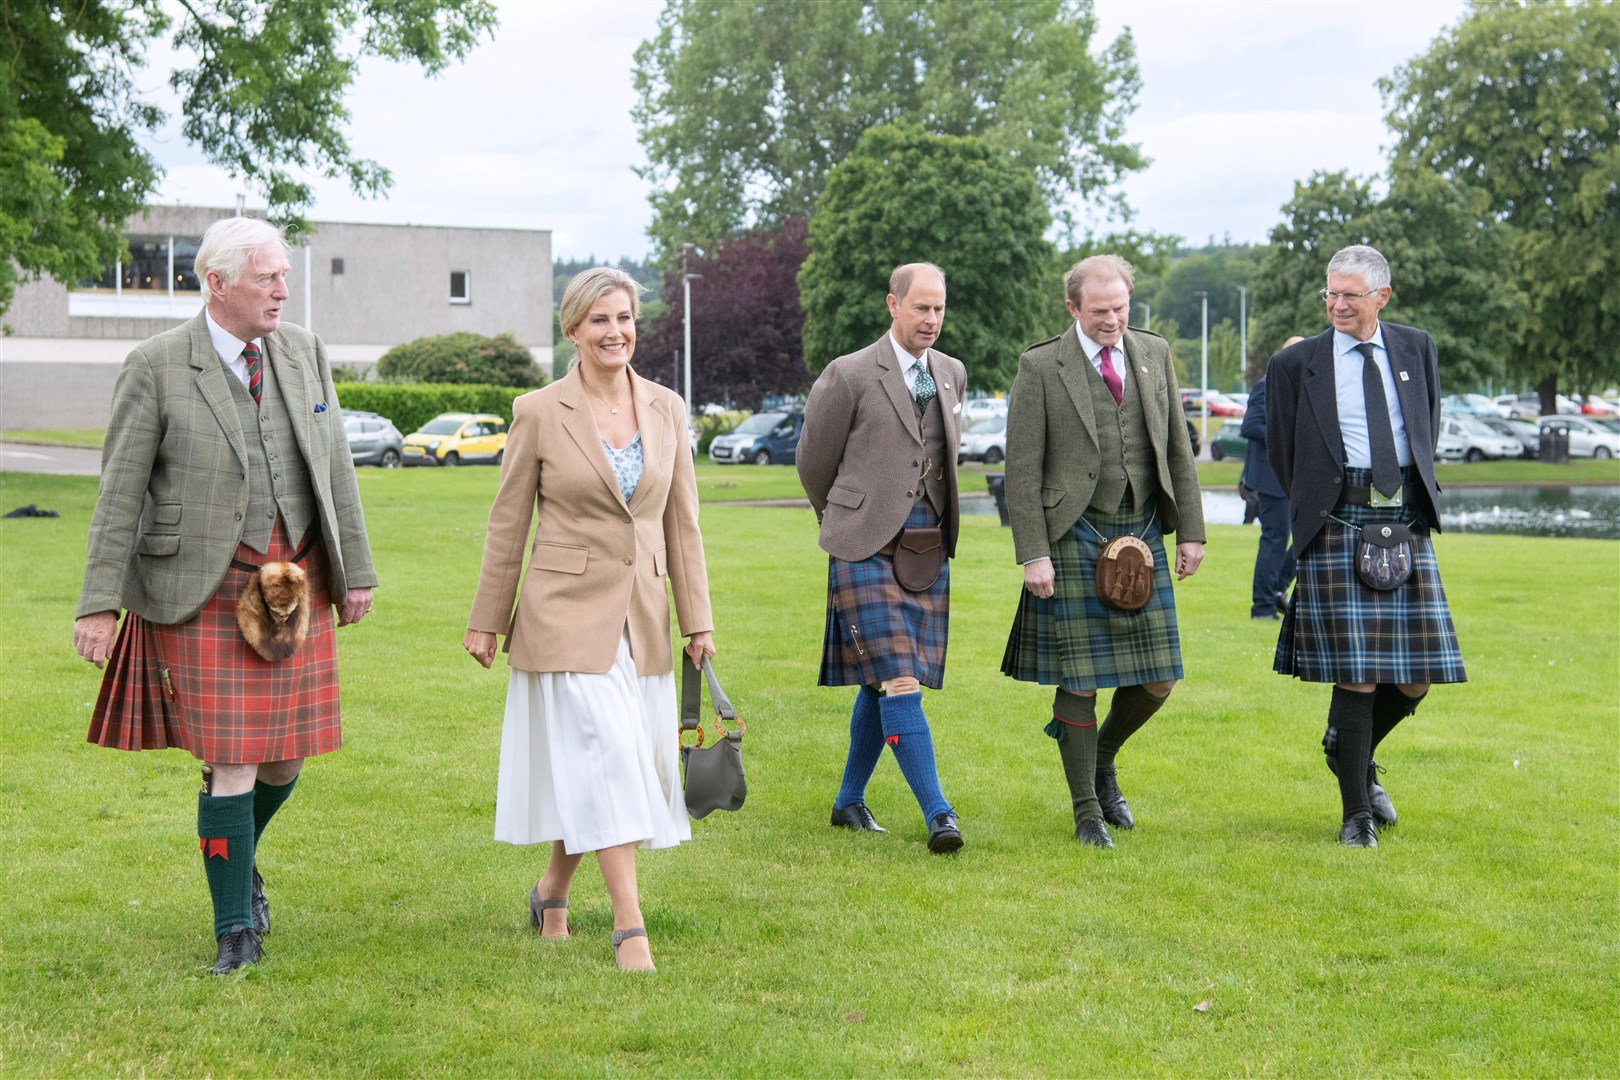 The Earl and Countess of Forfar are joined by Lord Lieutenant of Moray Seymour Monro (left), Lord Lieutenant of Banffshire Andrew Simpson (right) and the Duke of Moray John Stuart (second left) as they arrive at Cooper Park in Elgin. Picture: Daniel Forsyth